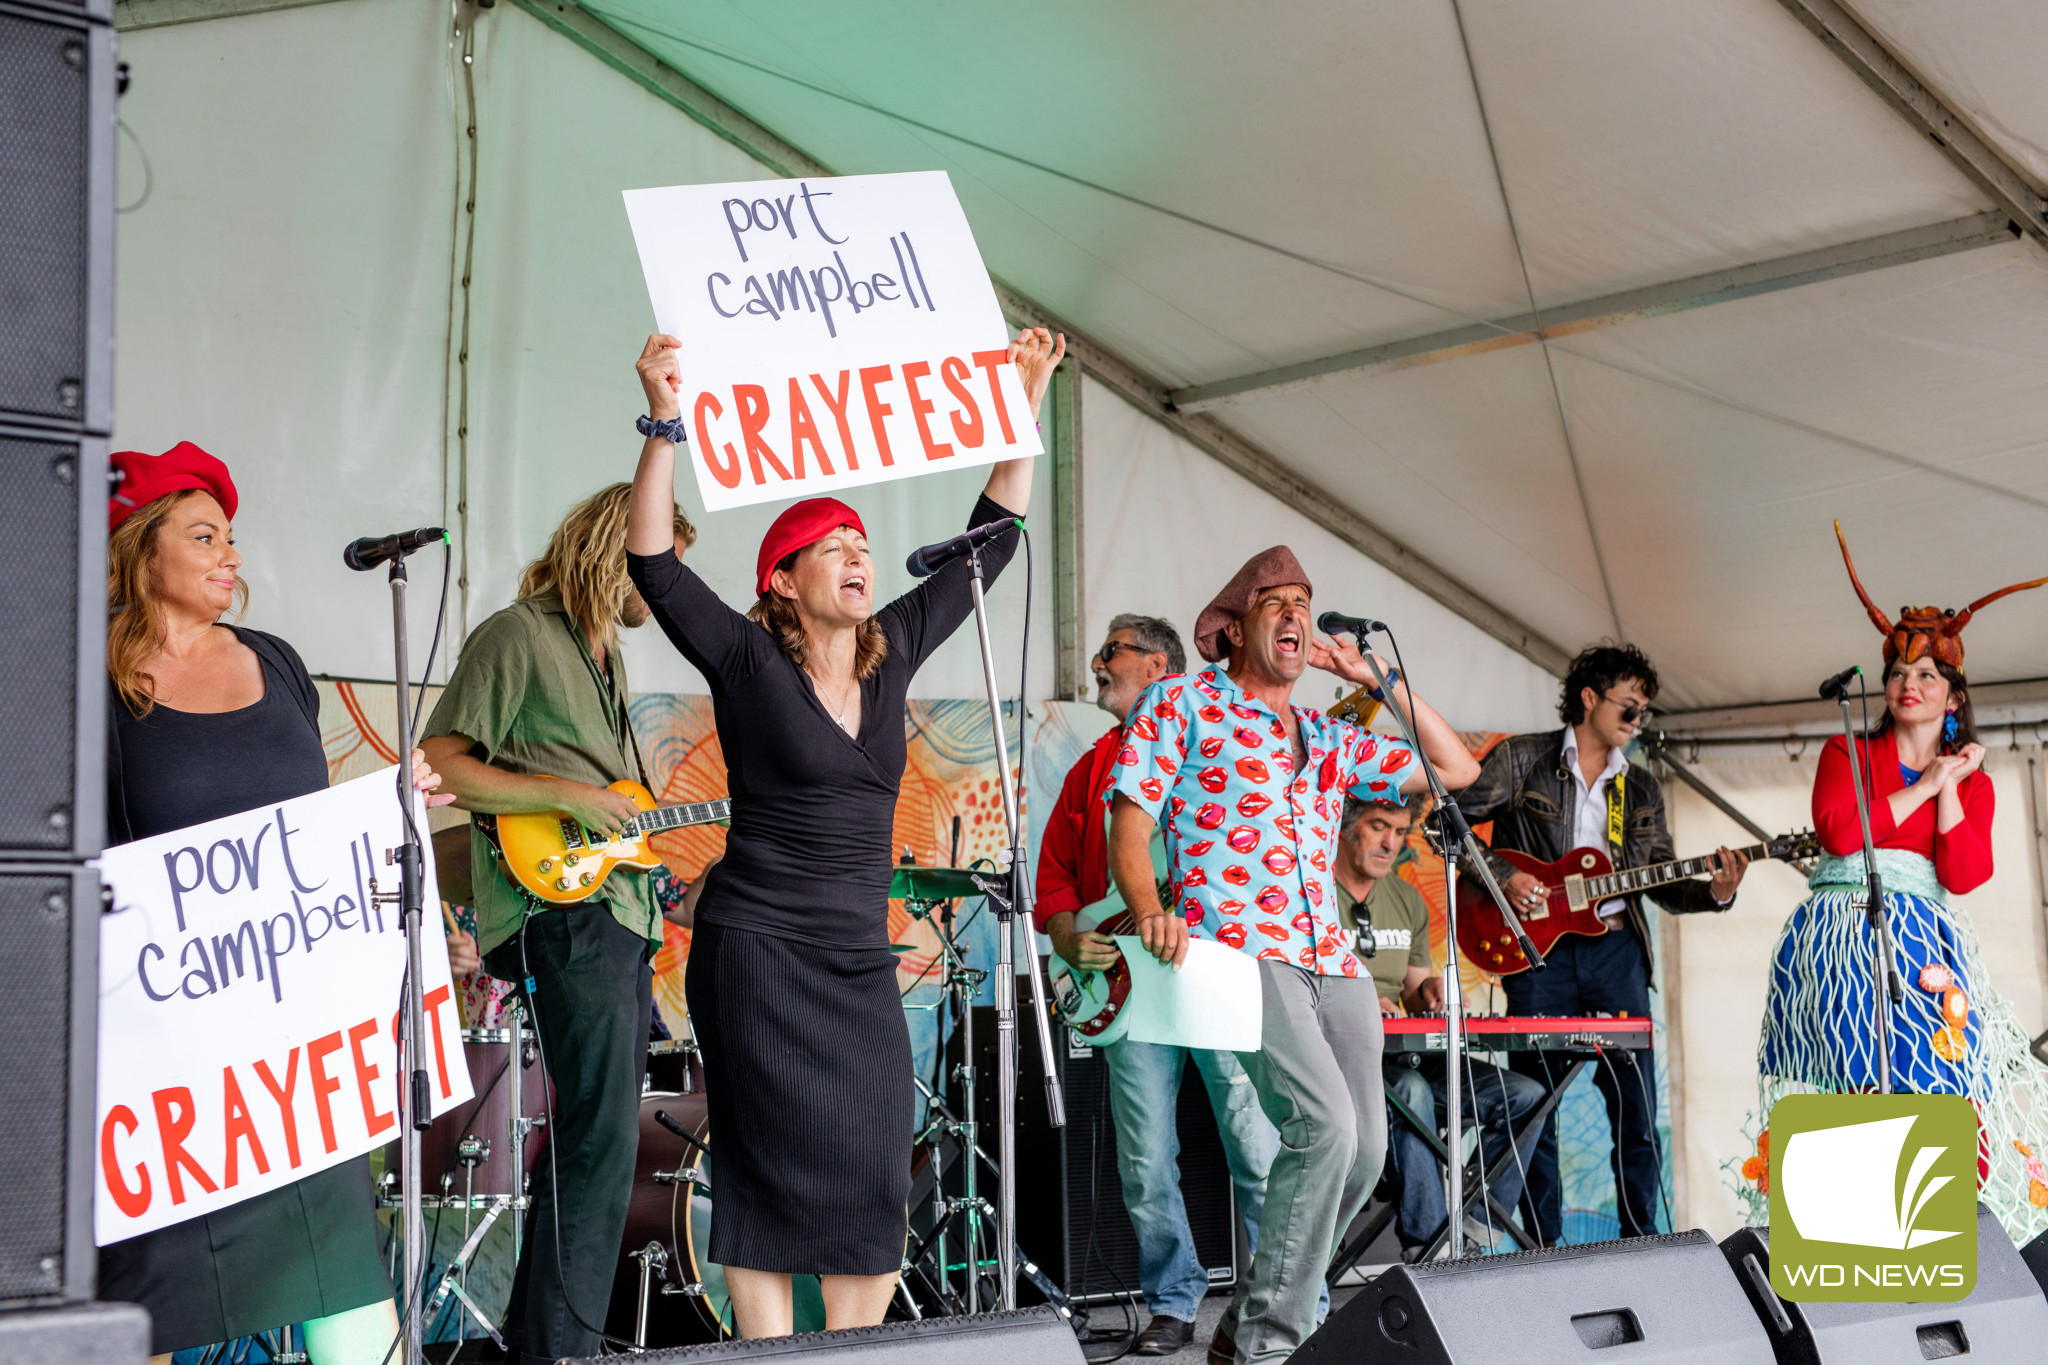 Busy weekend: Matt Langoustine and the Kitchen Rhythm Section will be performing at this weekend’s Crayfest event in Port Campbell.